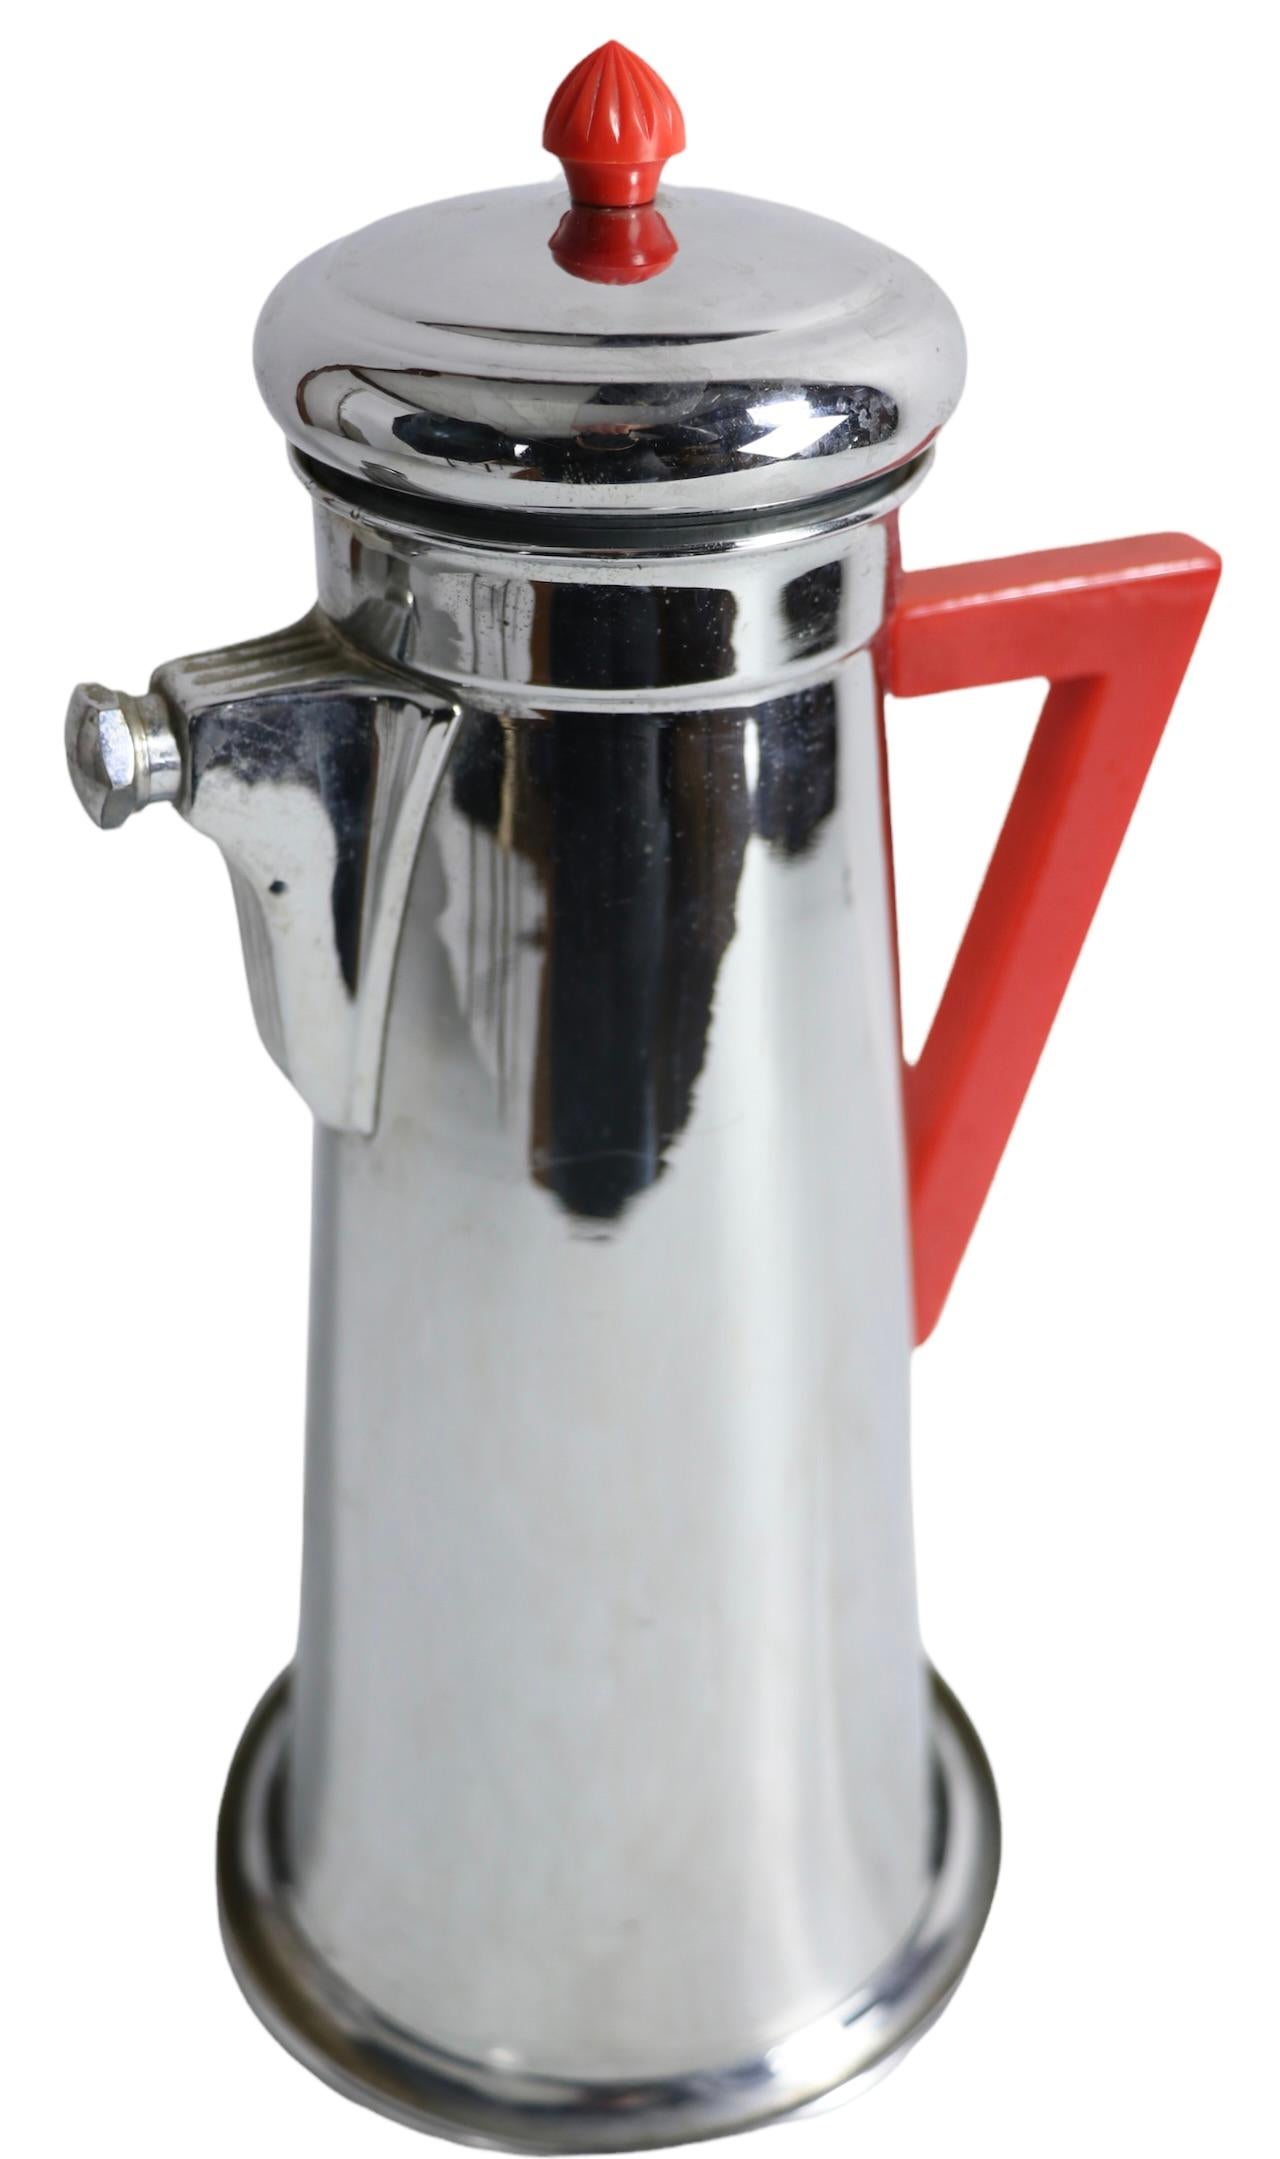 American Art Deco Chrome and Bakelite Recipe Cocktail Shaker by Forman Bros, Ca. 1930's